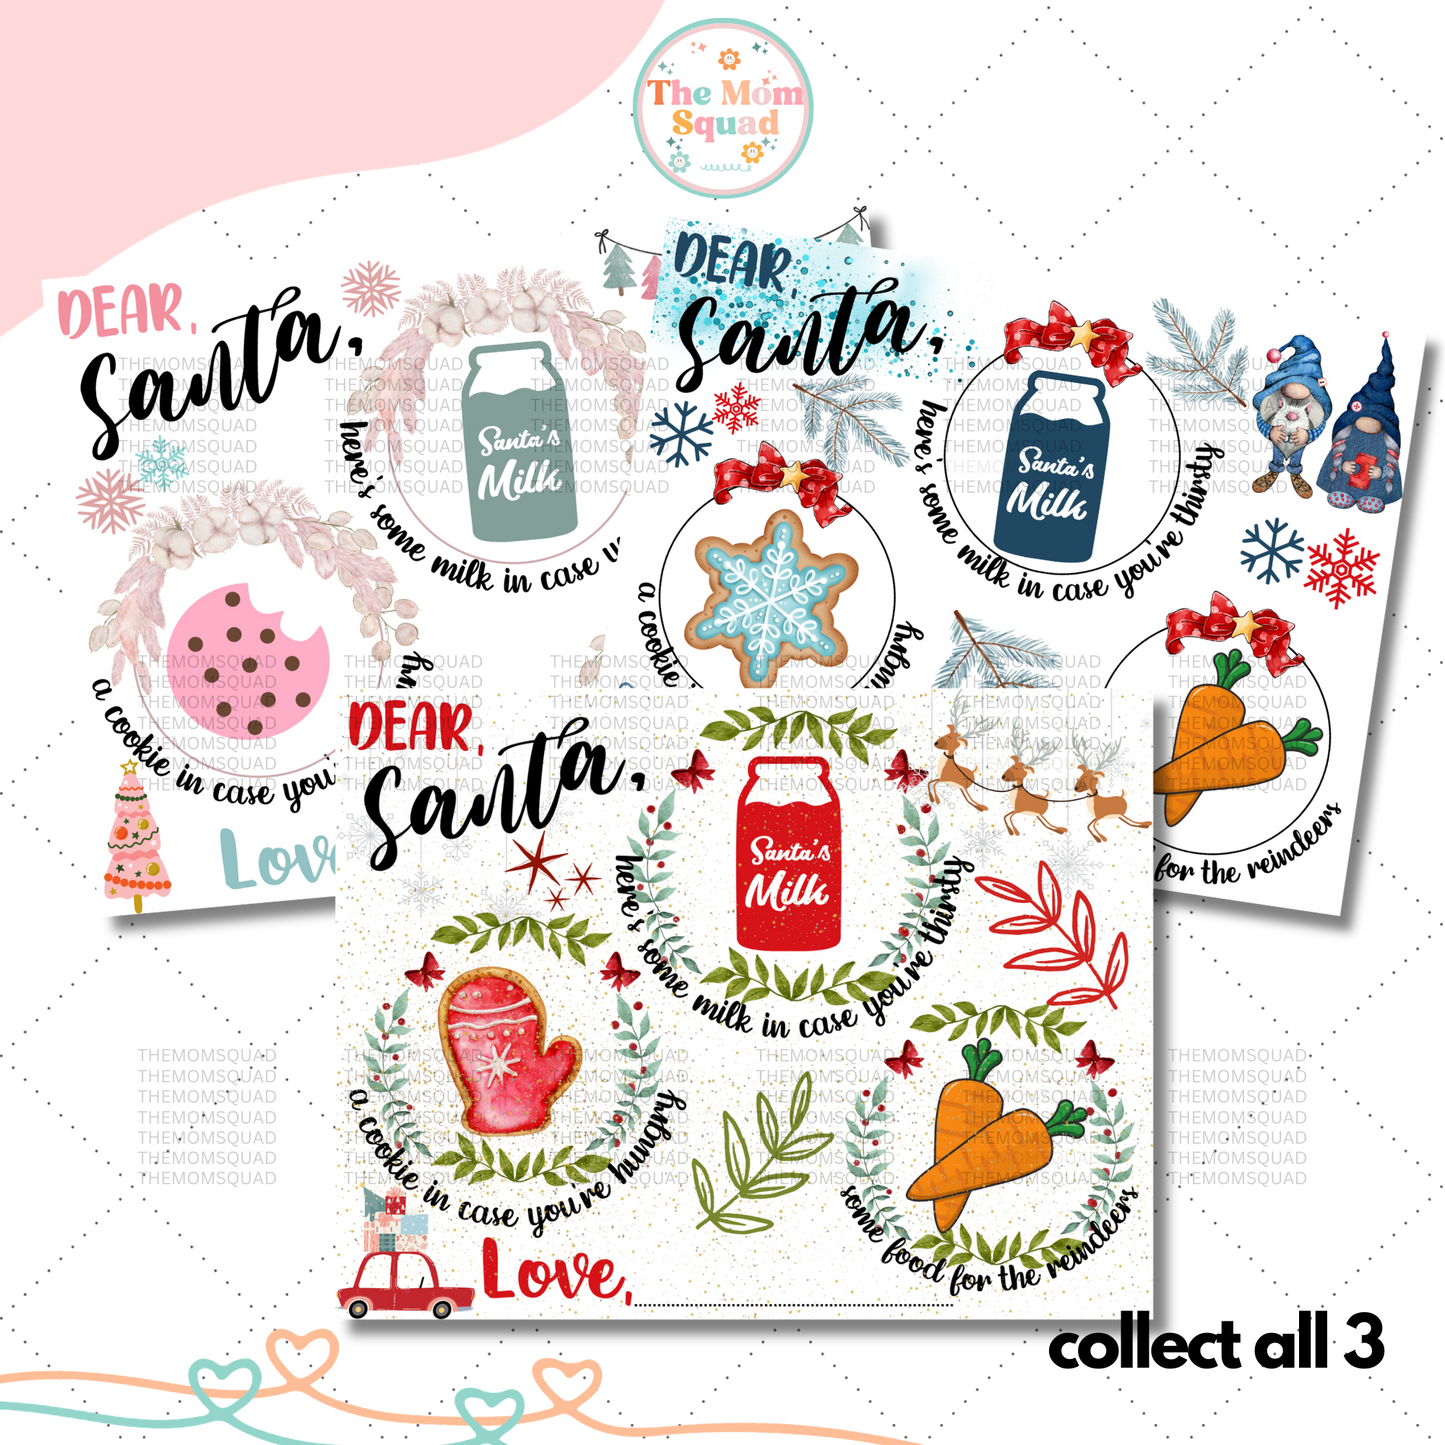 Dear Santa Cookie Tray Placemat Printable (8.5" x 11") – Festive Design for Reindeer Treats, Santa Cookies, and Milk Delight! Create Enchanting Holiday Memories.